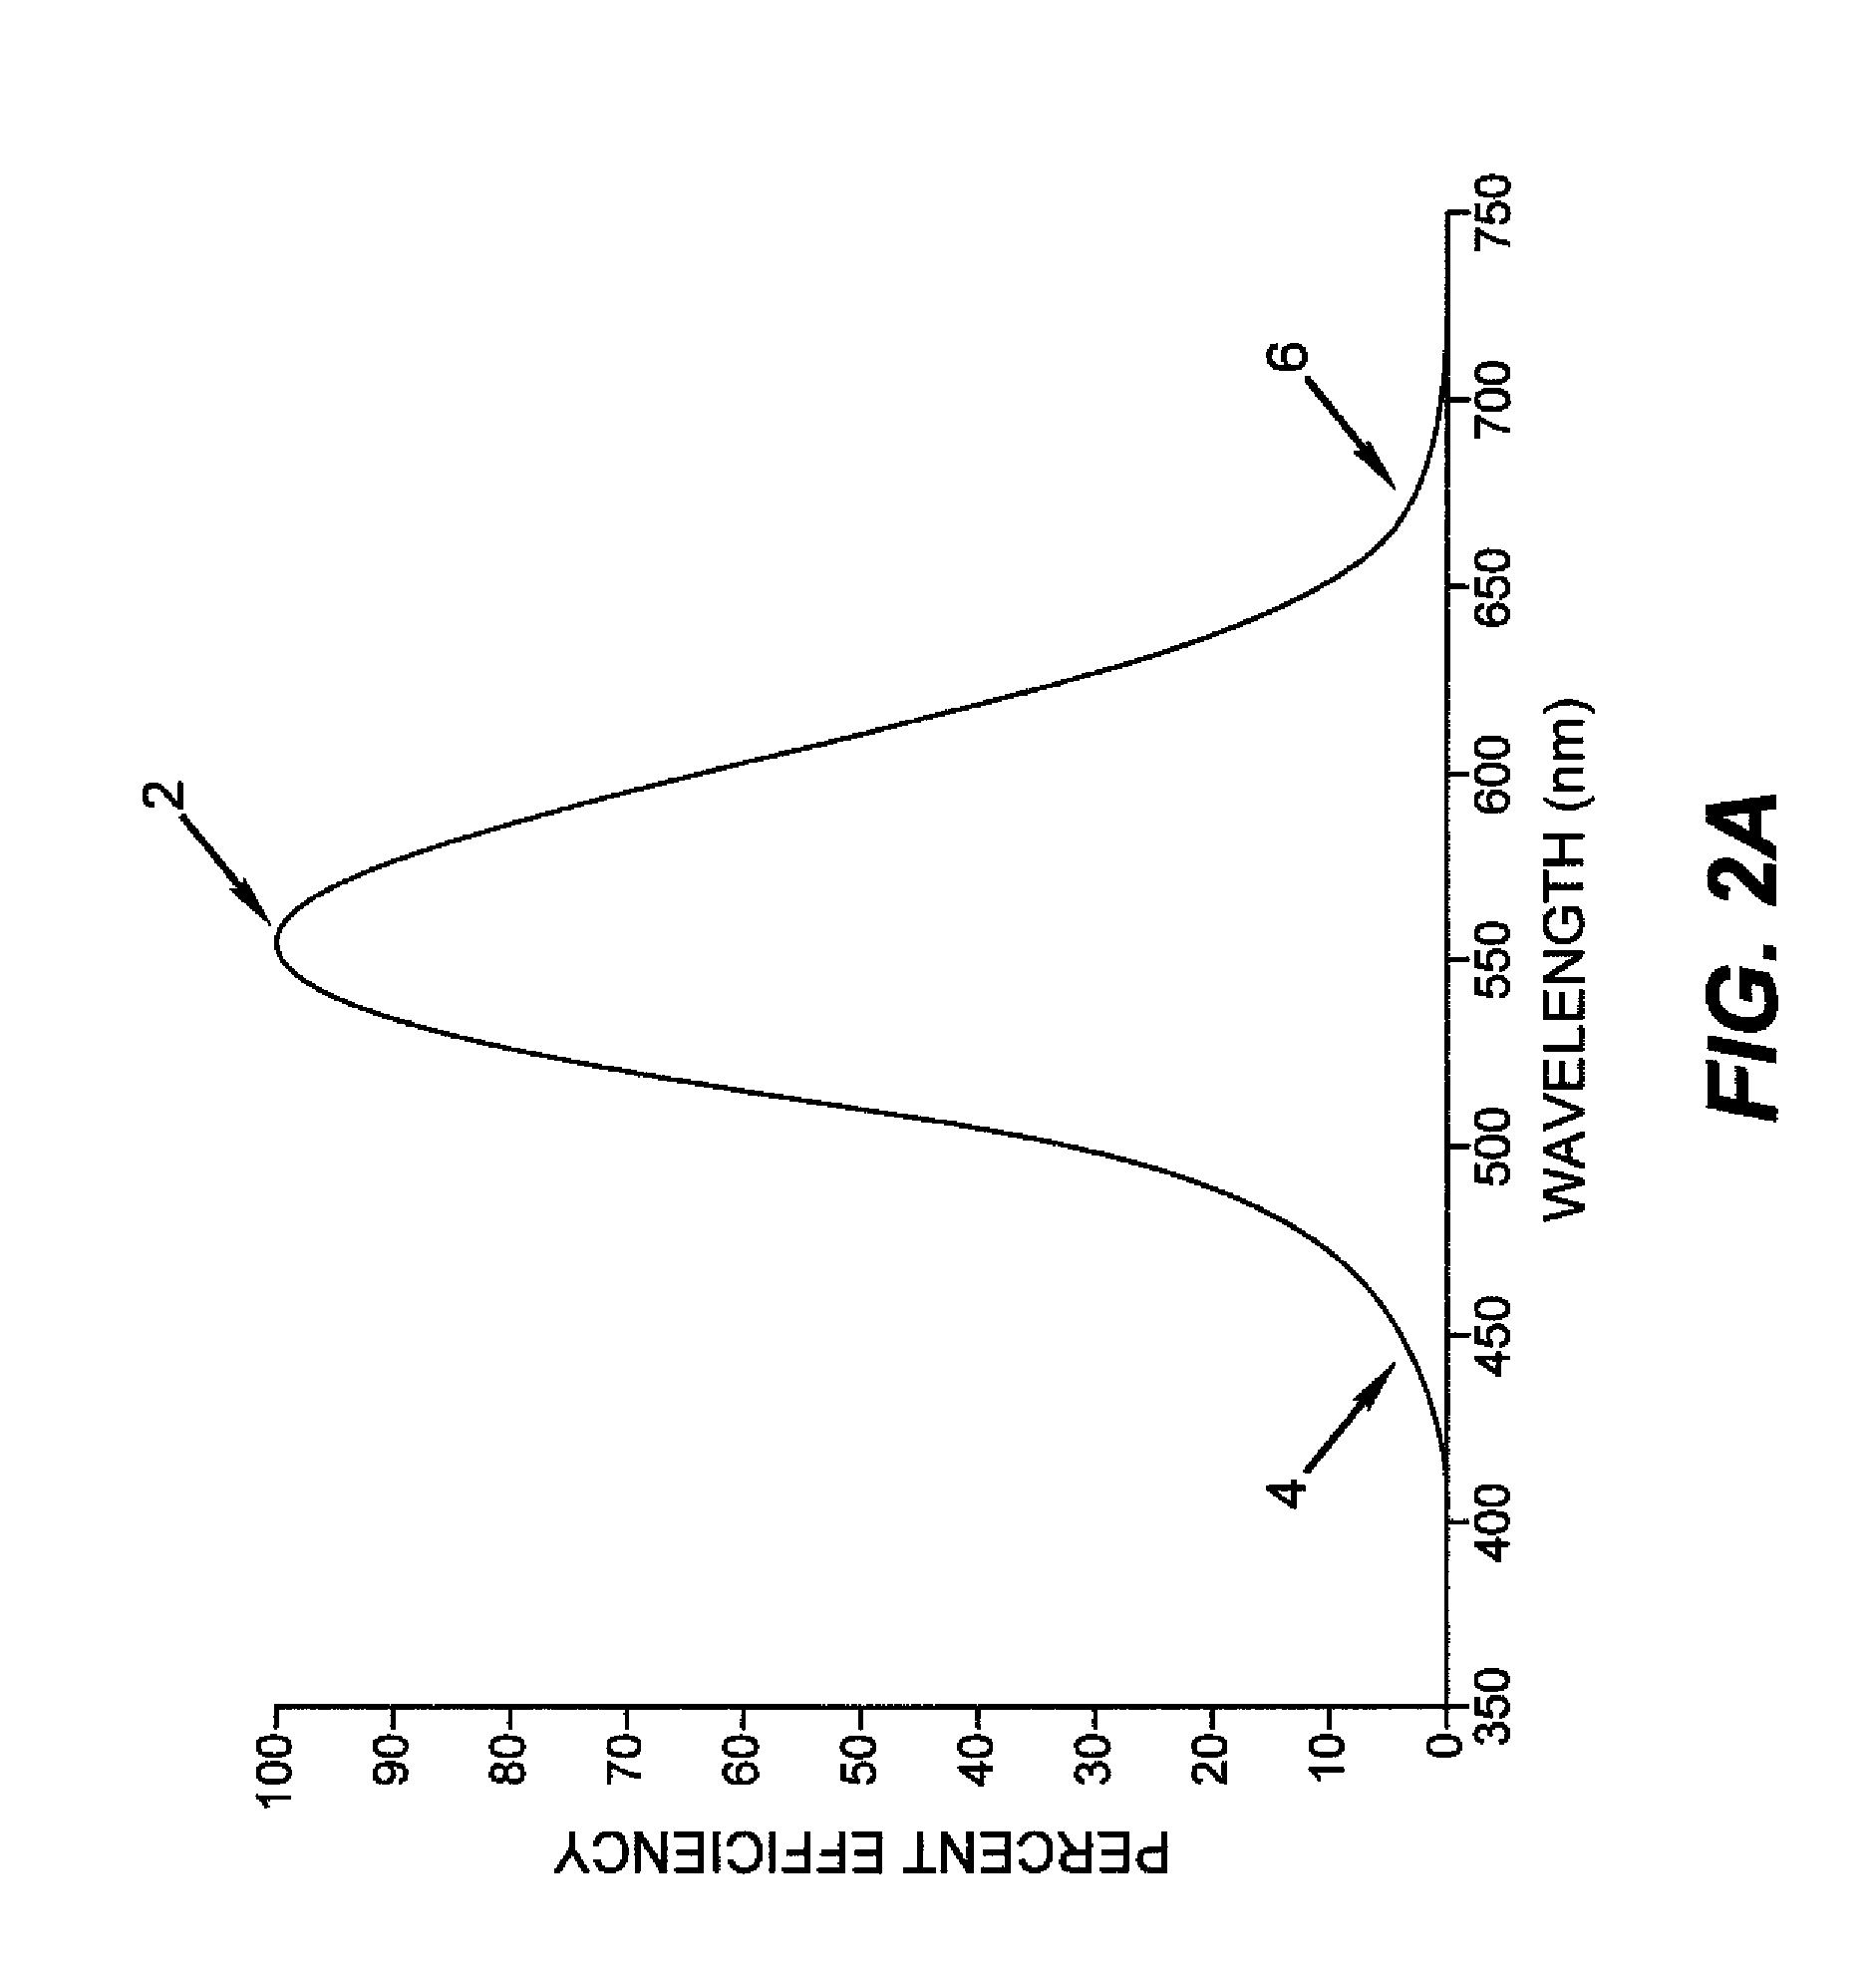 2D/3D switchable color display apparatus with narrow band emitters